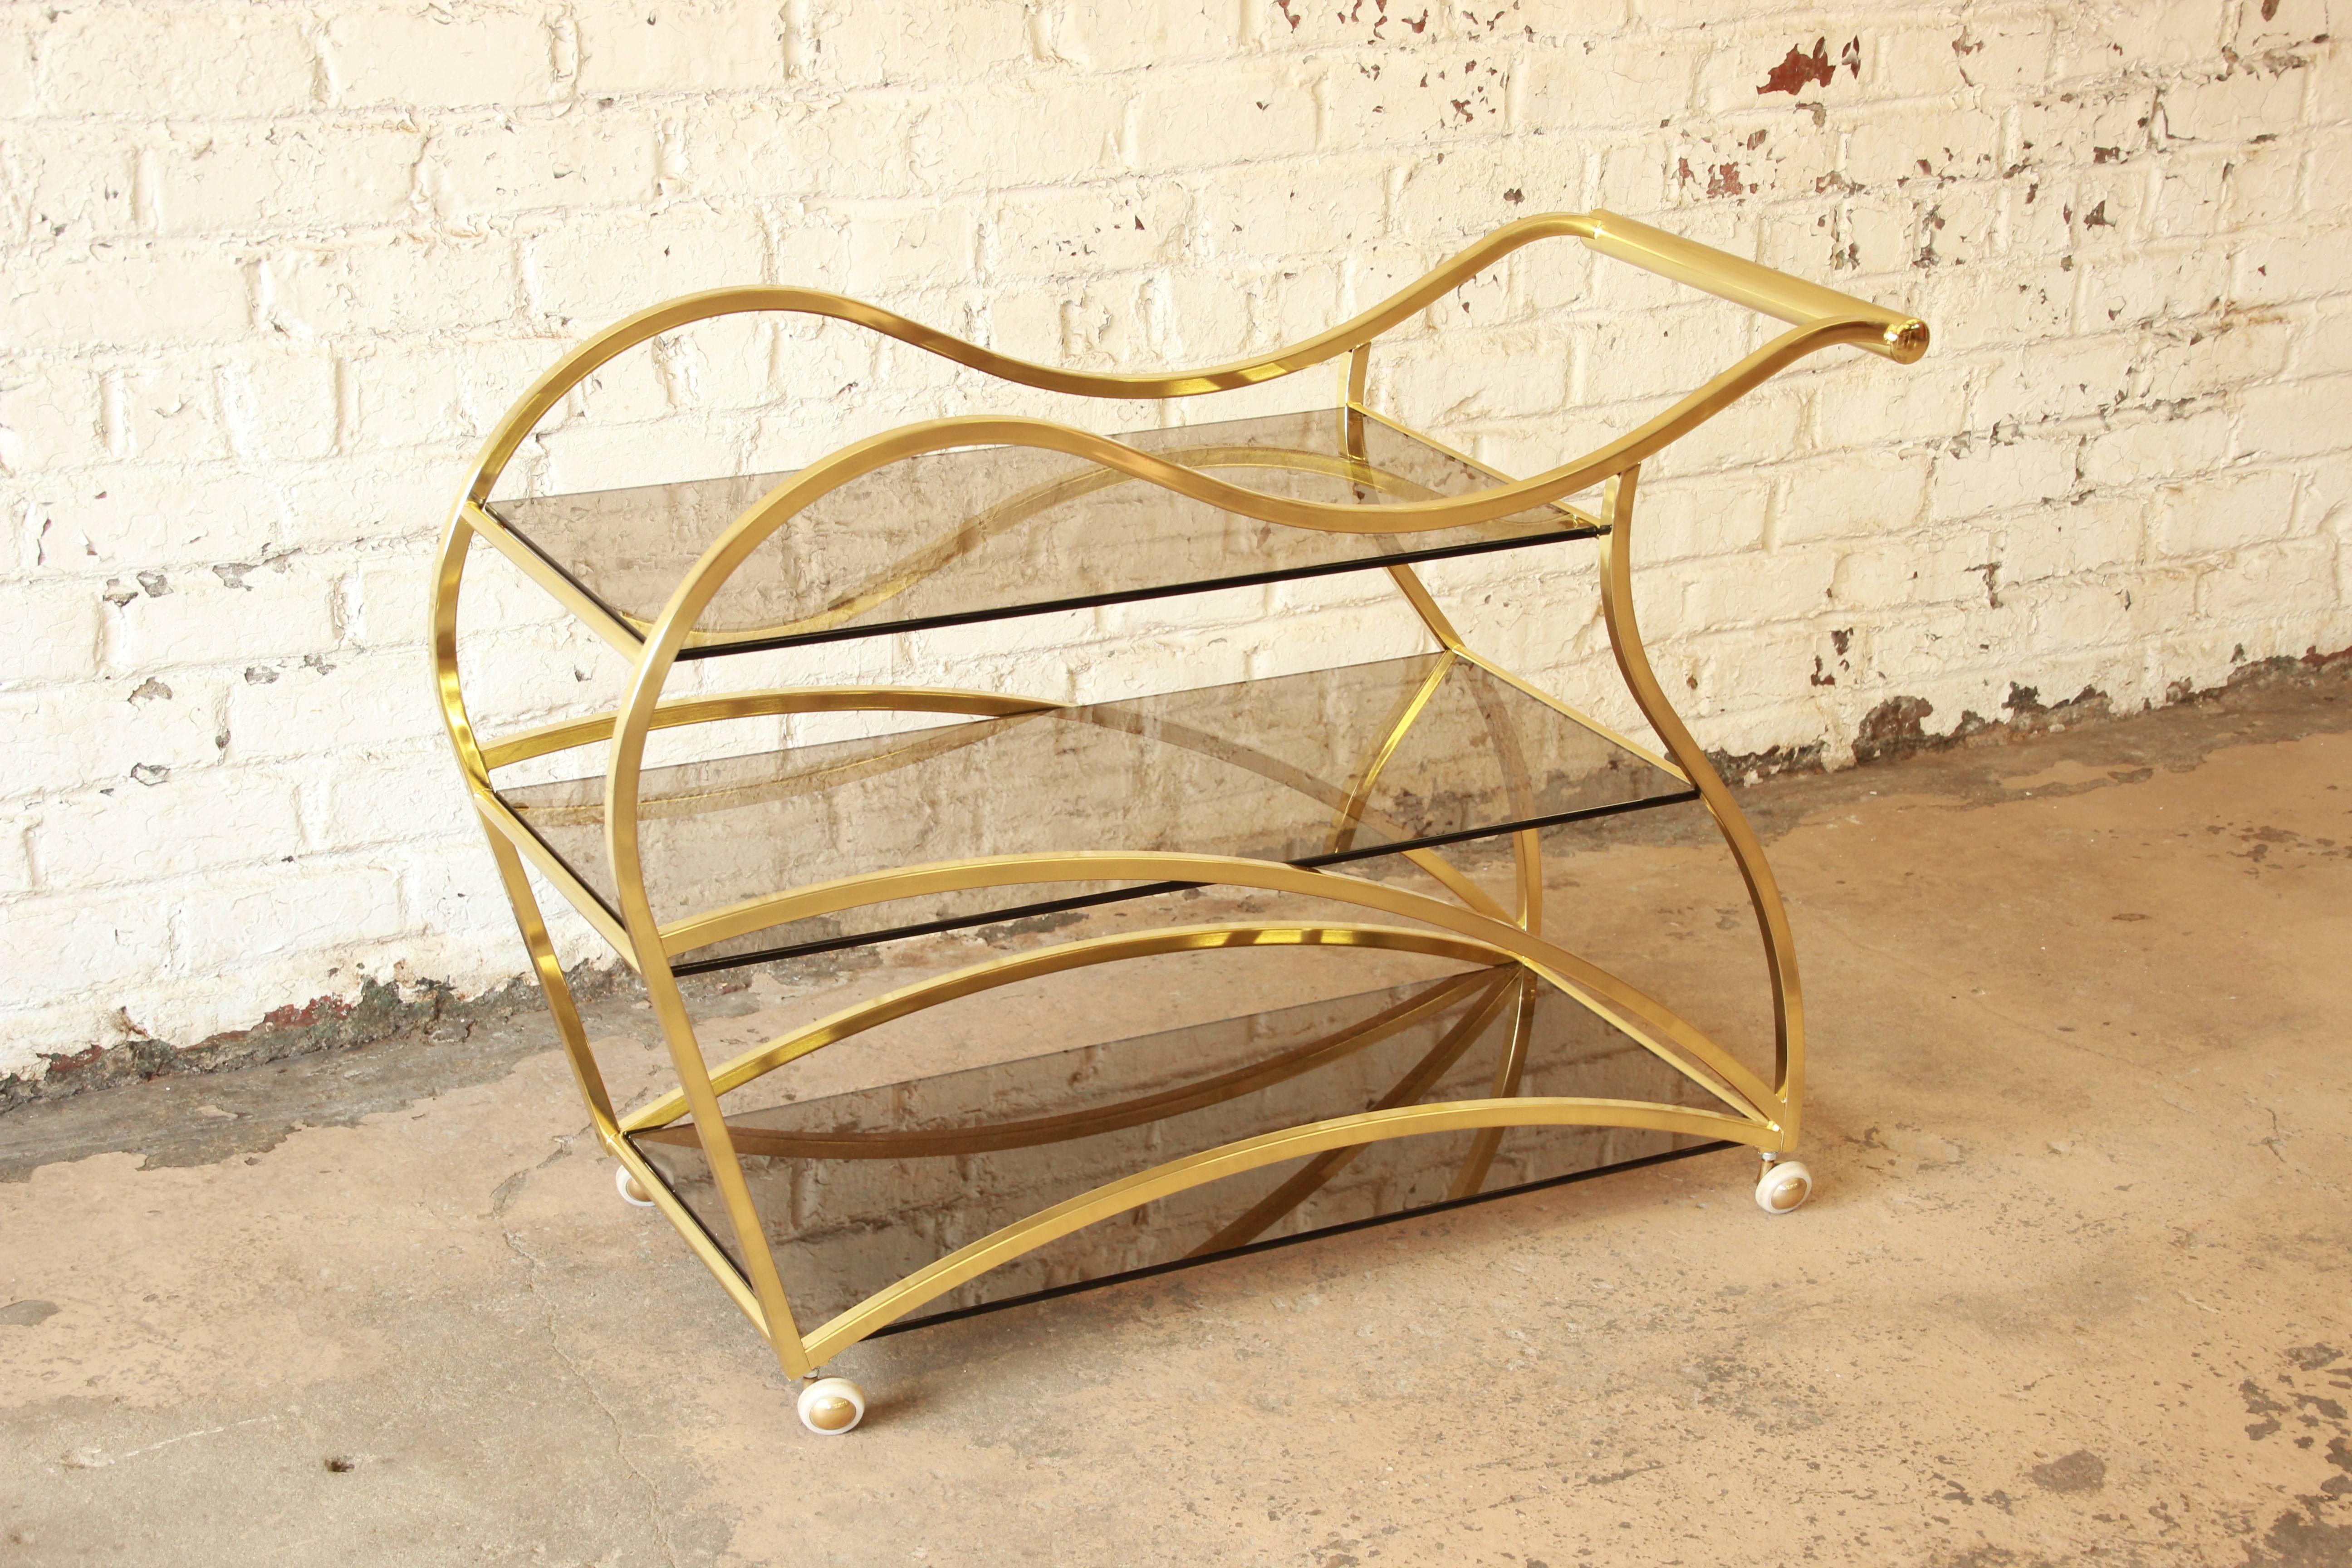 A very rare curved brass and smoked glass bar cart attributed to Milo Baughman for the Design Institute of America. Sleek and stylish modern design. The cart sits on metal casters for easy mobility. Very unique example of Baughman's iconic design